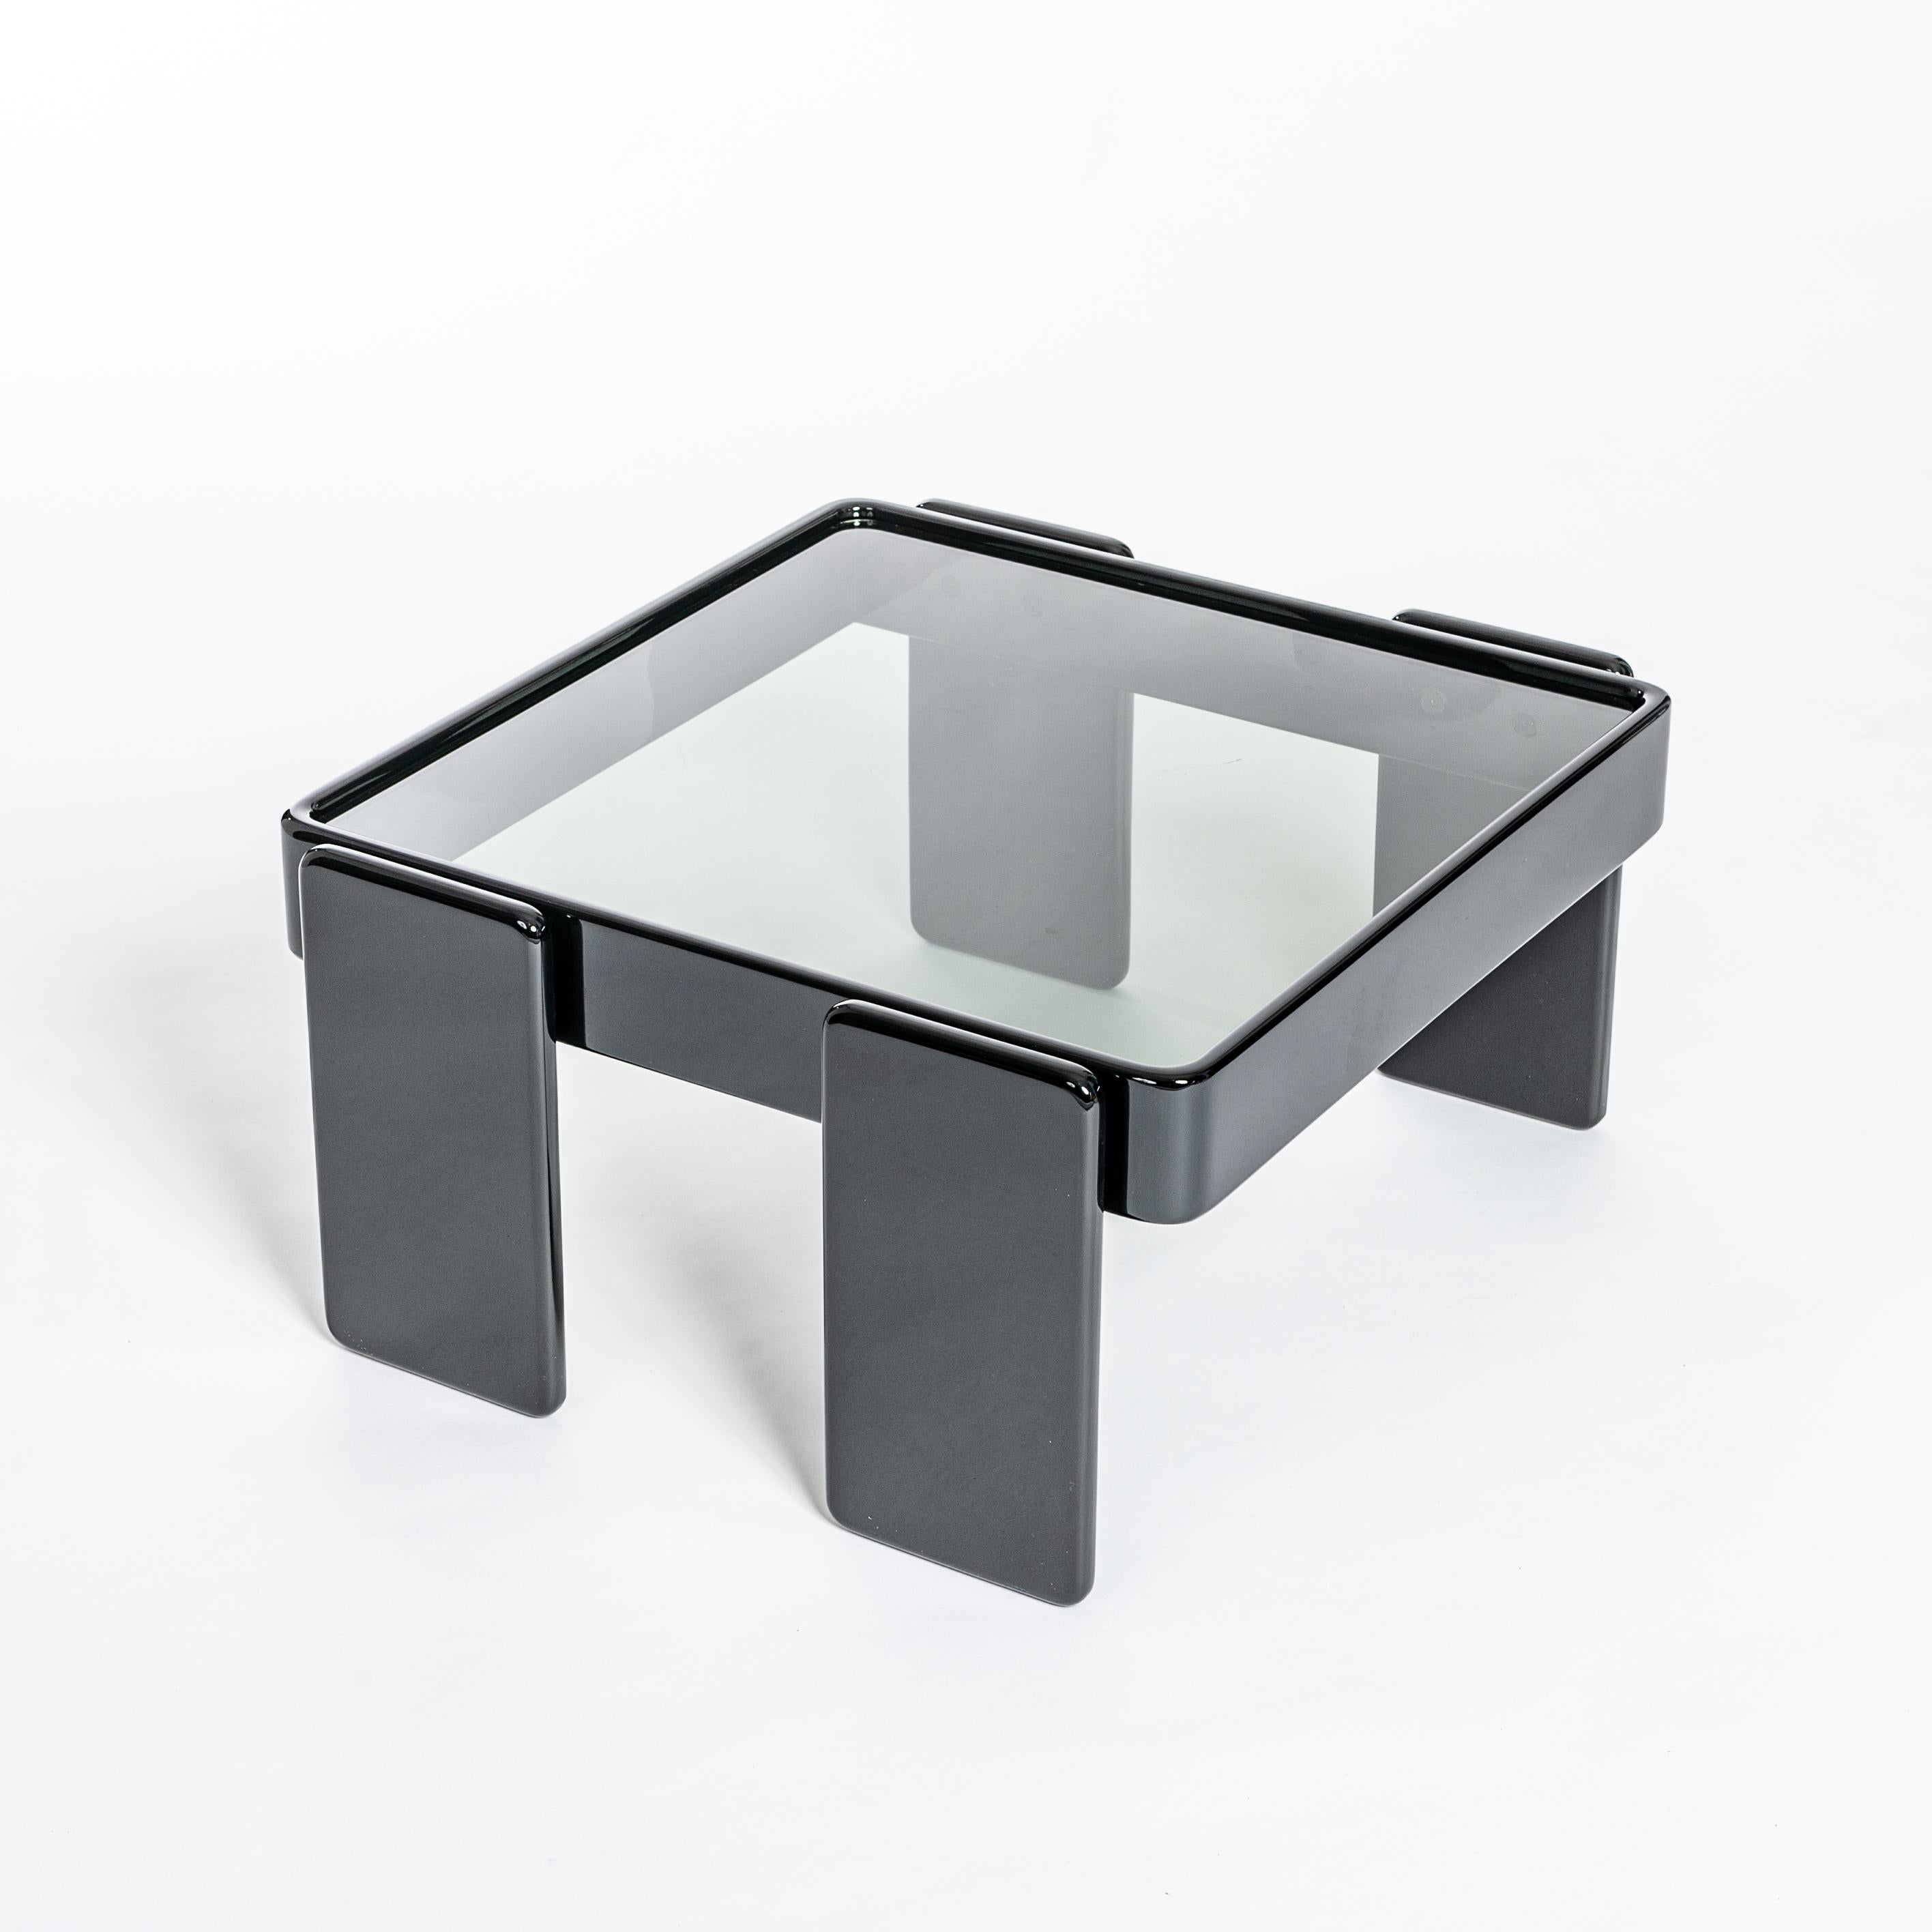 Hand-Crafted Italian Midcentury Gianfranco Frattini Black Nesting Tables for Cassina, 1960s For Sale